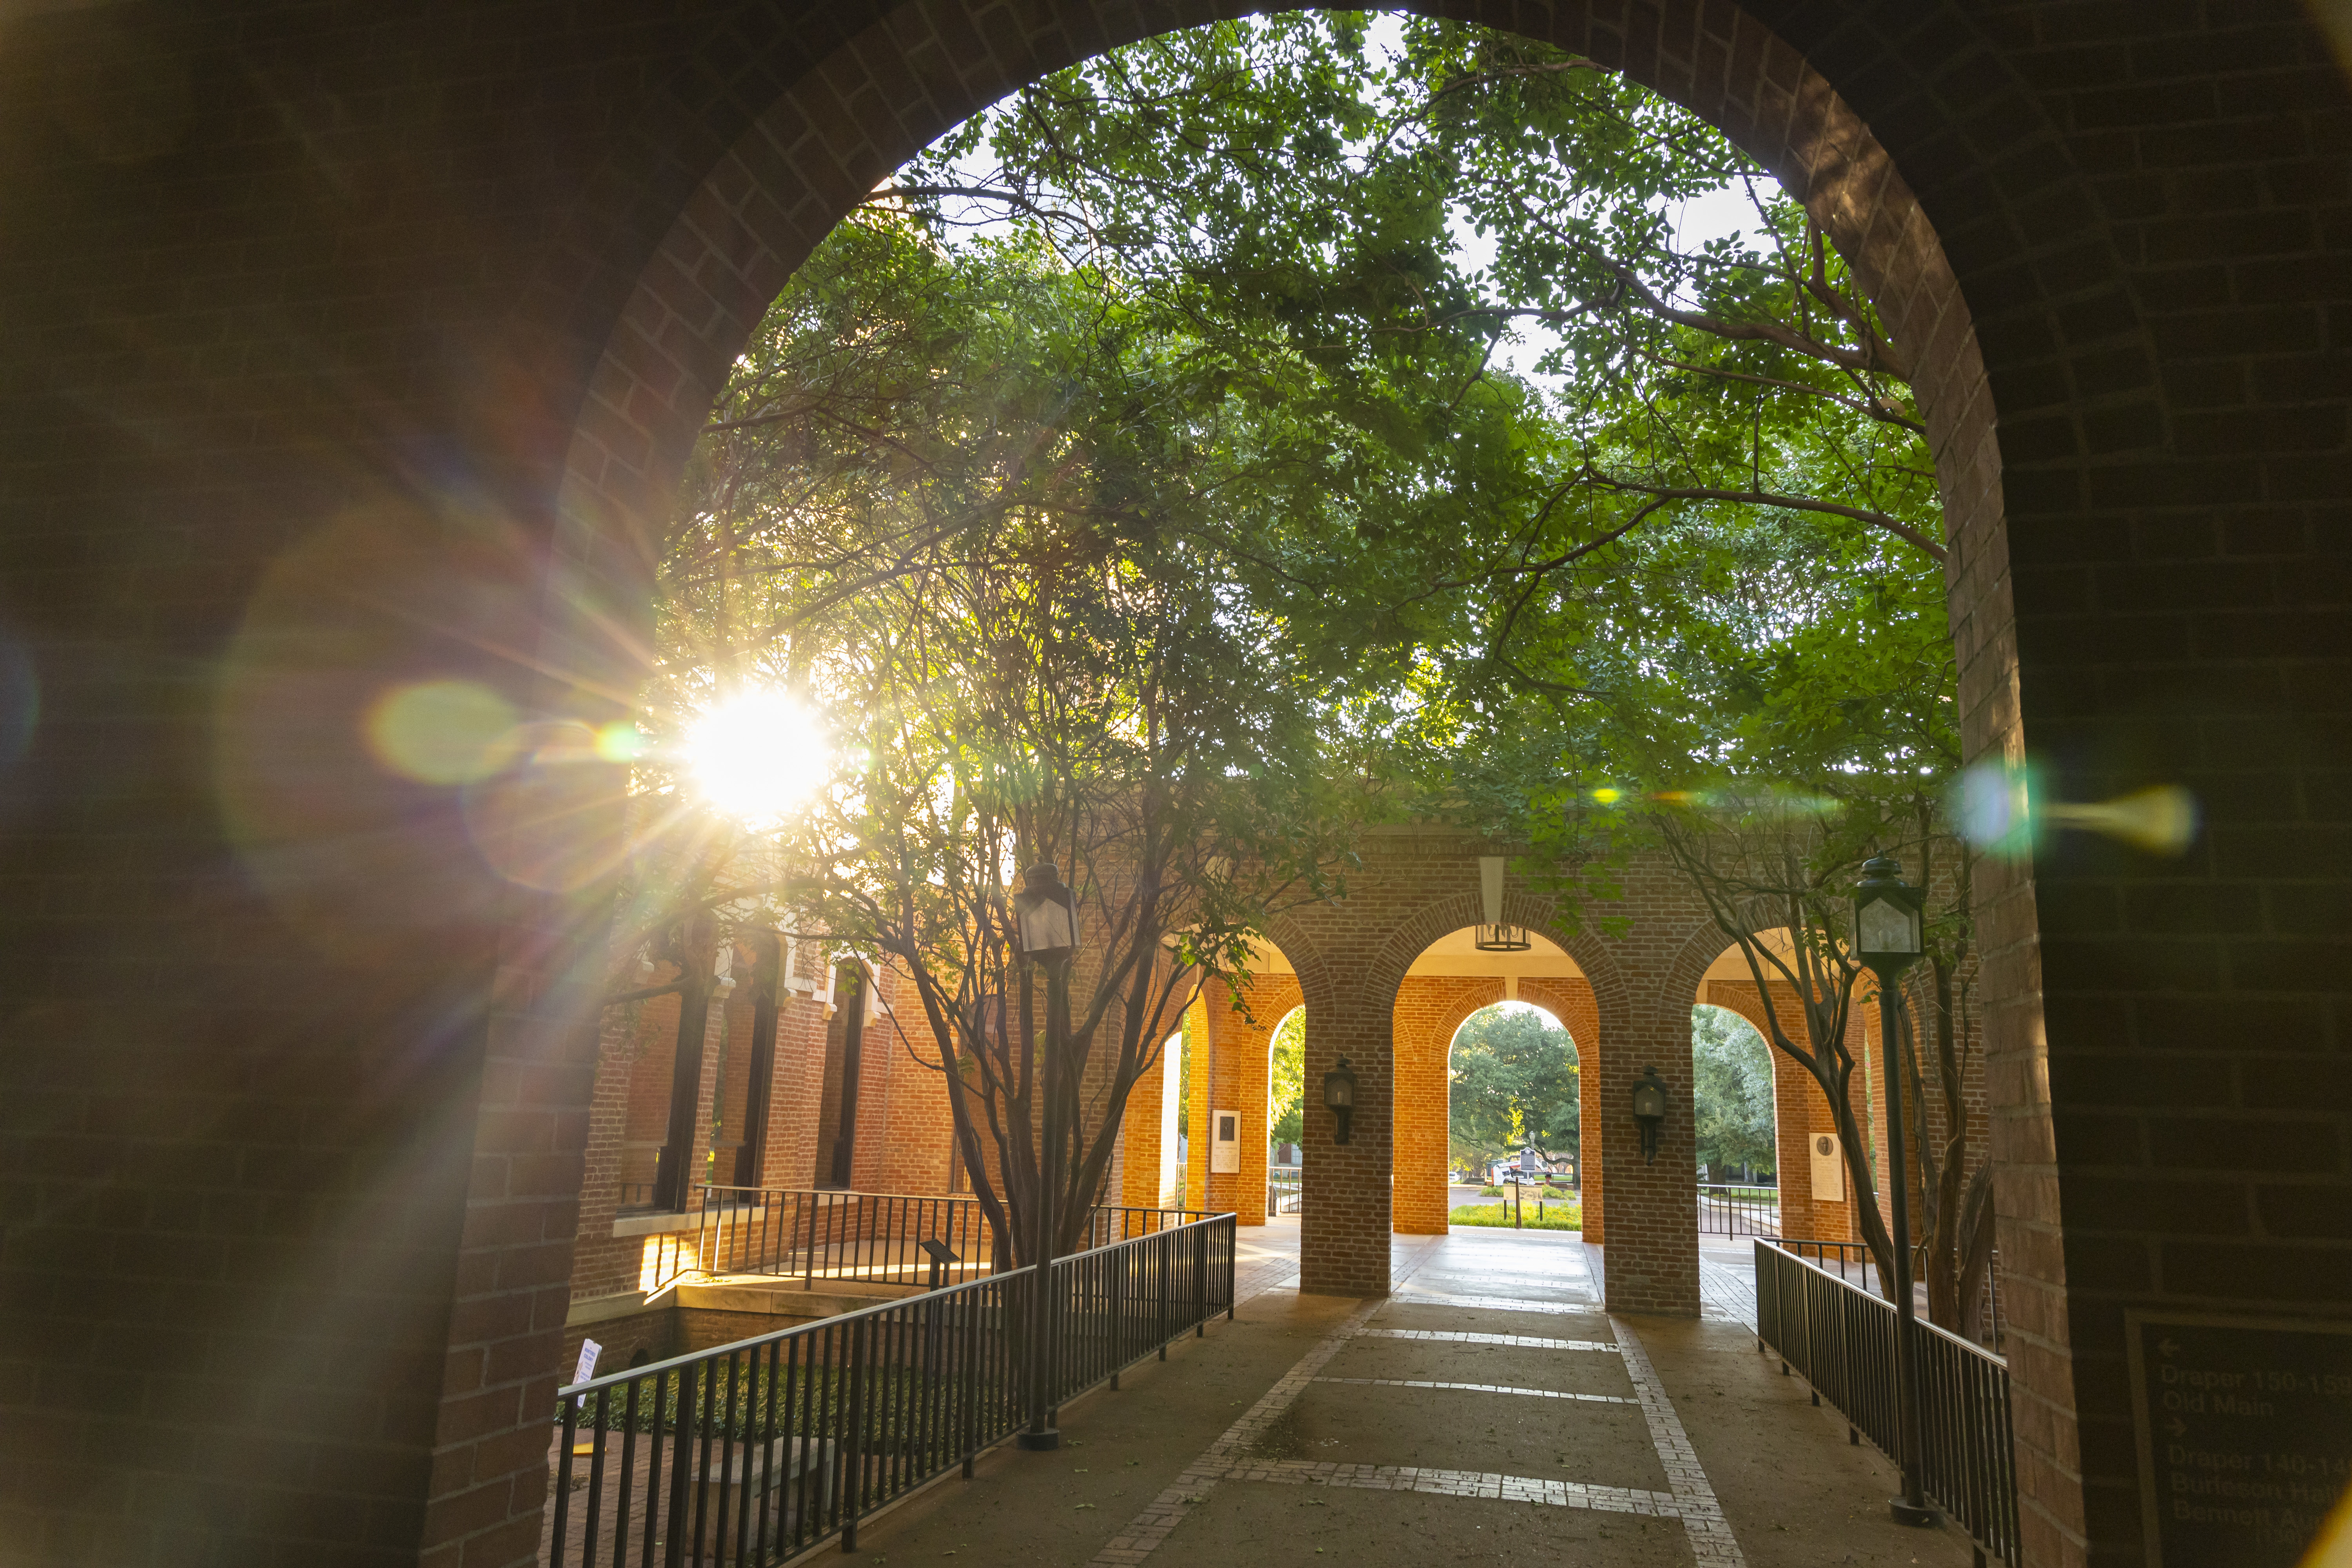 Baylor innovates in online professional education